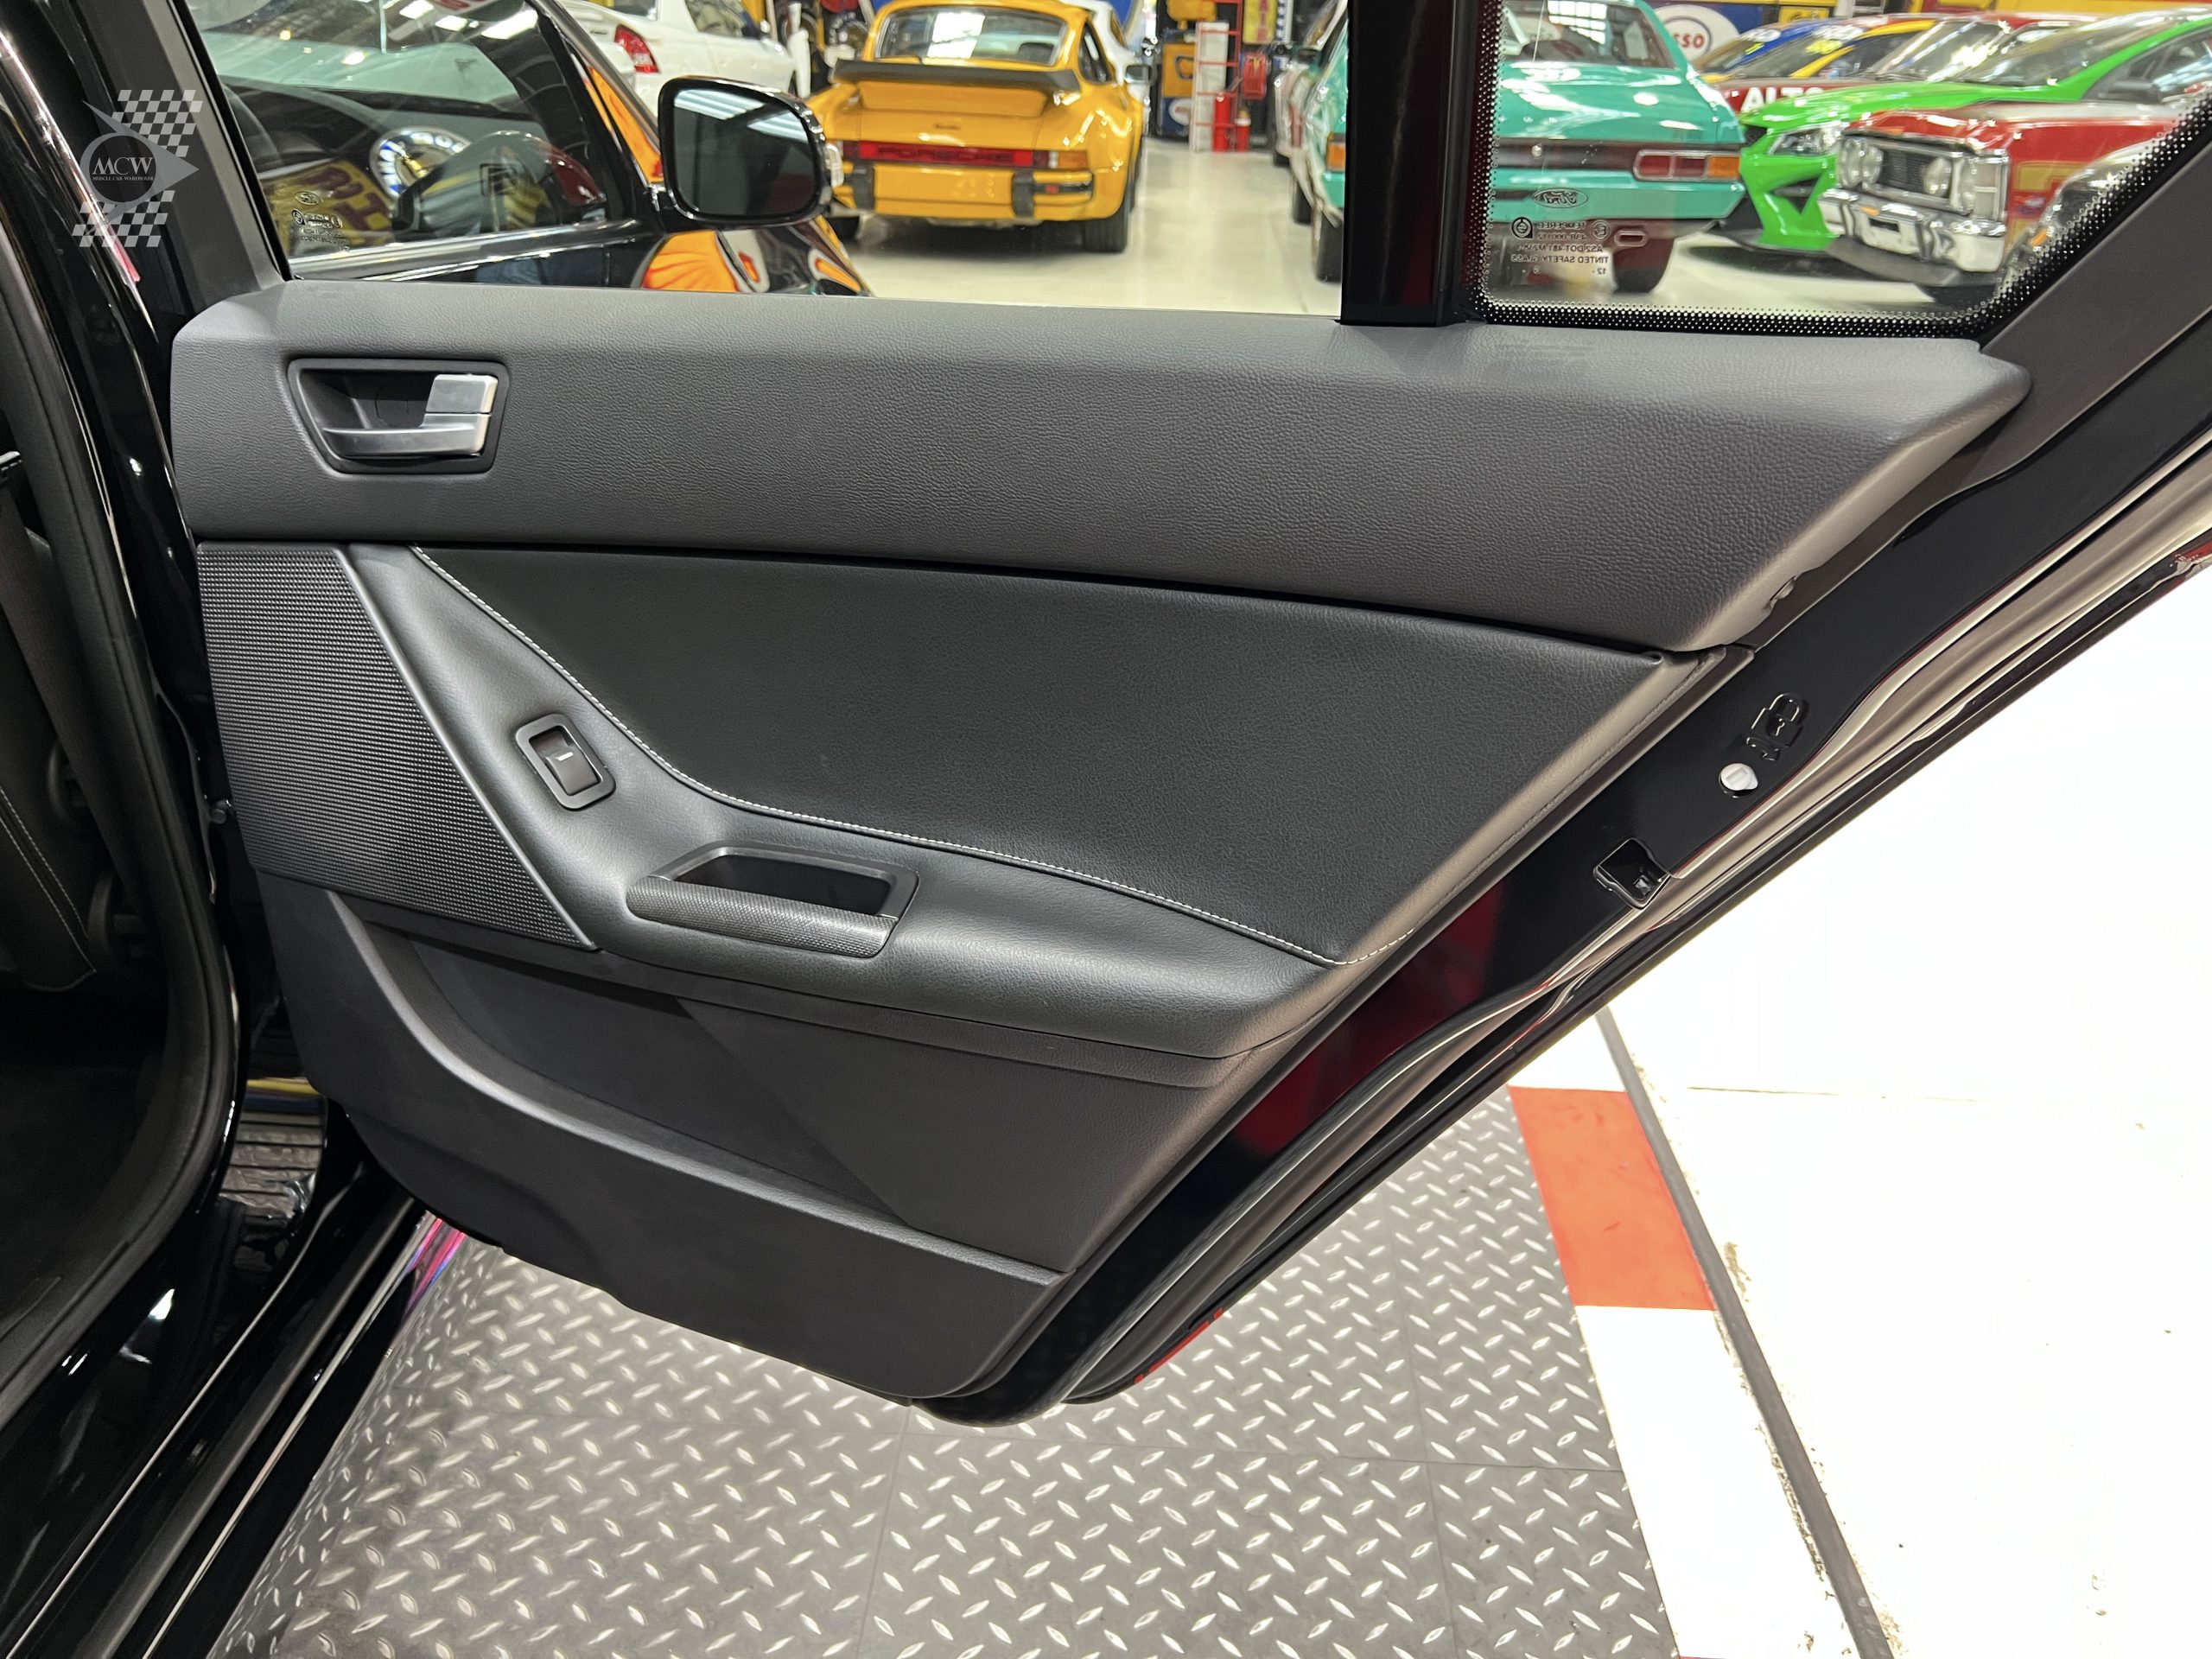 2012 Ford FG FPV GT R-Spec Door - Muscle Car Warehouse